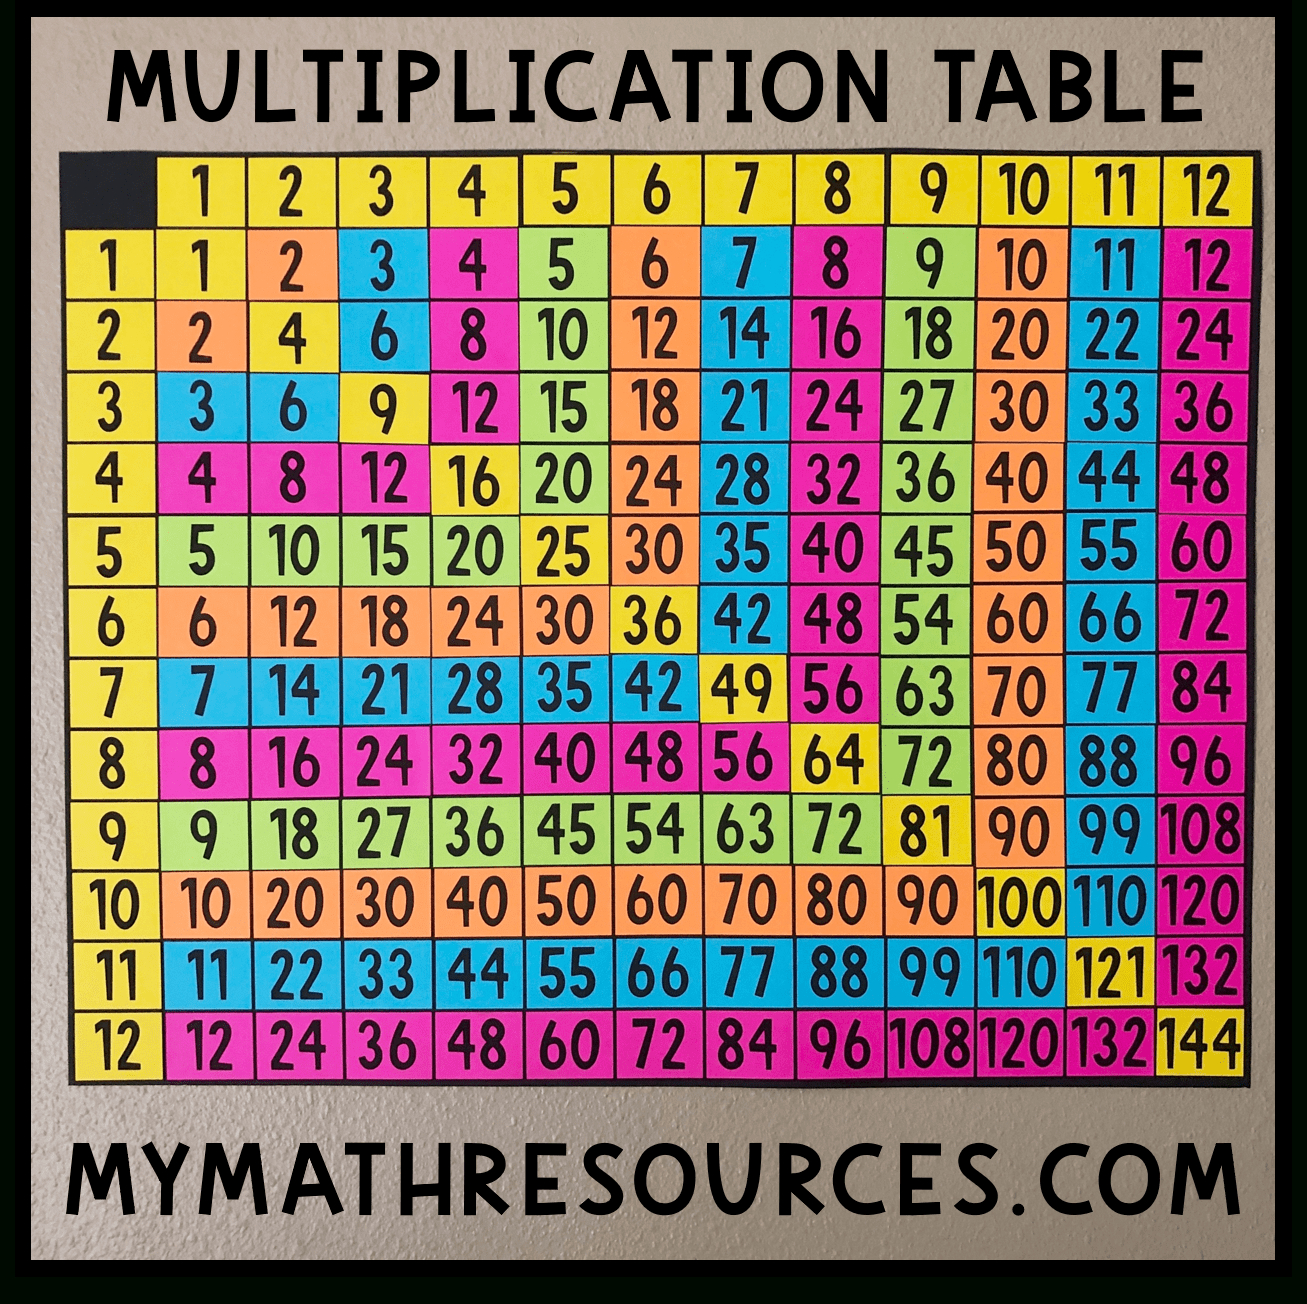 Free Multiplication Table Poster | Math Resources, Teaching with regard to Printable Multiplication Poster